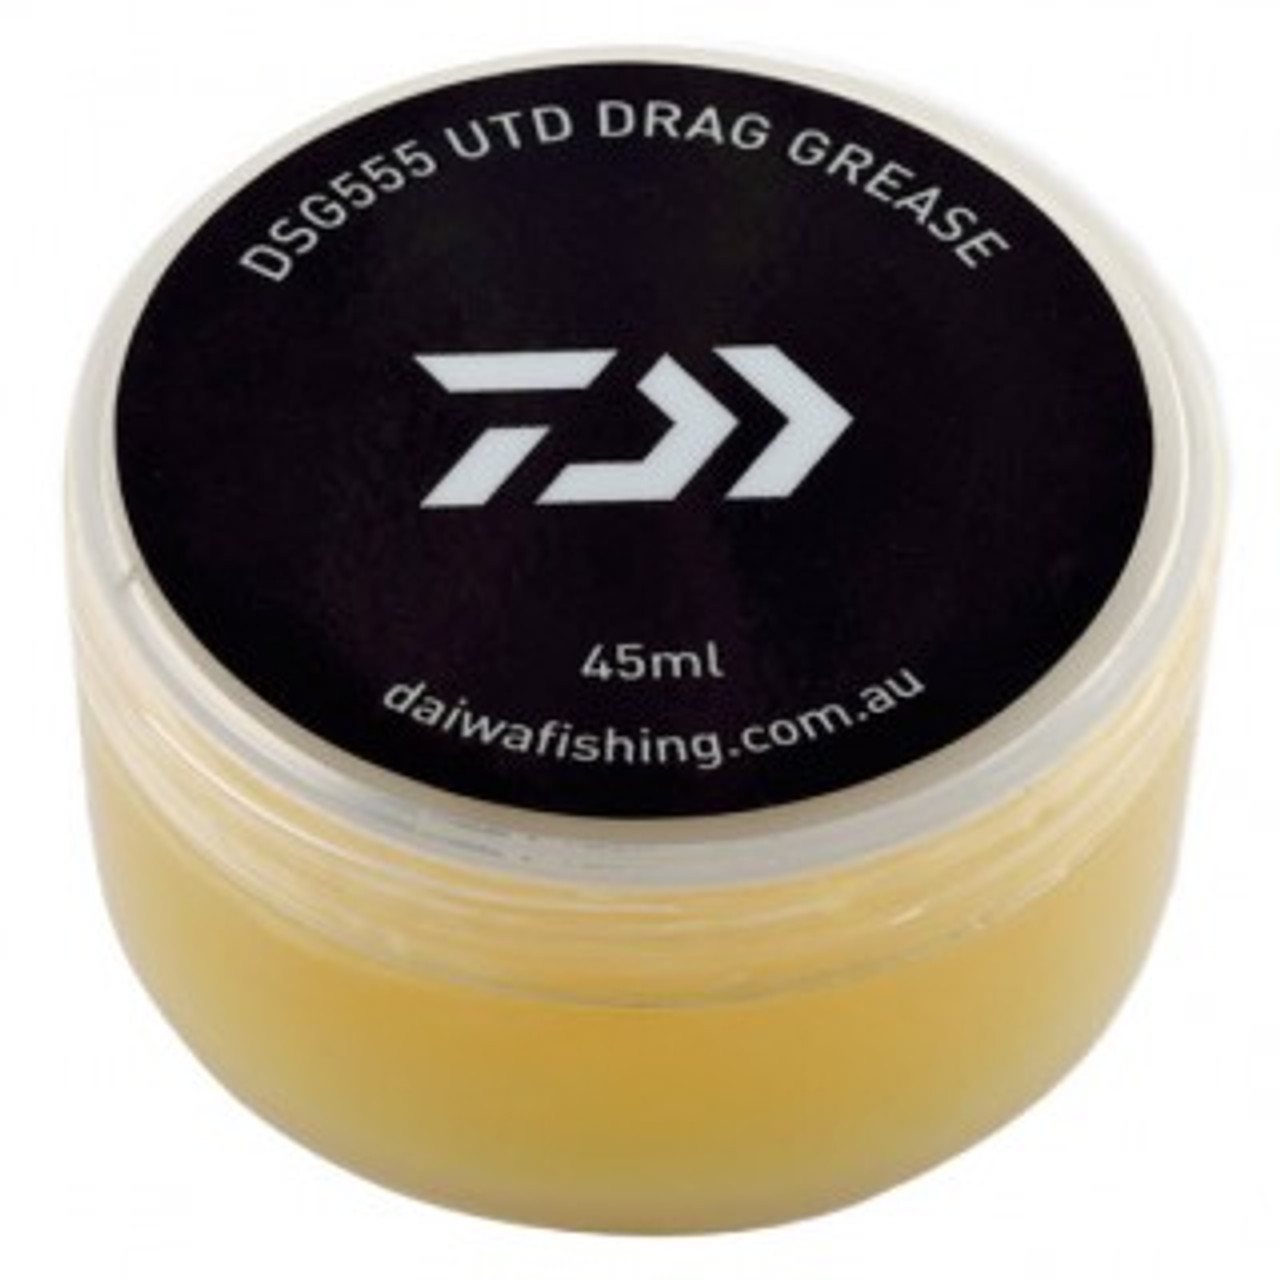 Daiwa UTD Drag Grease Instore only - Armadale Angling